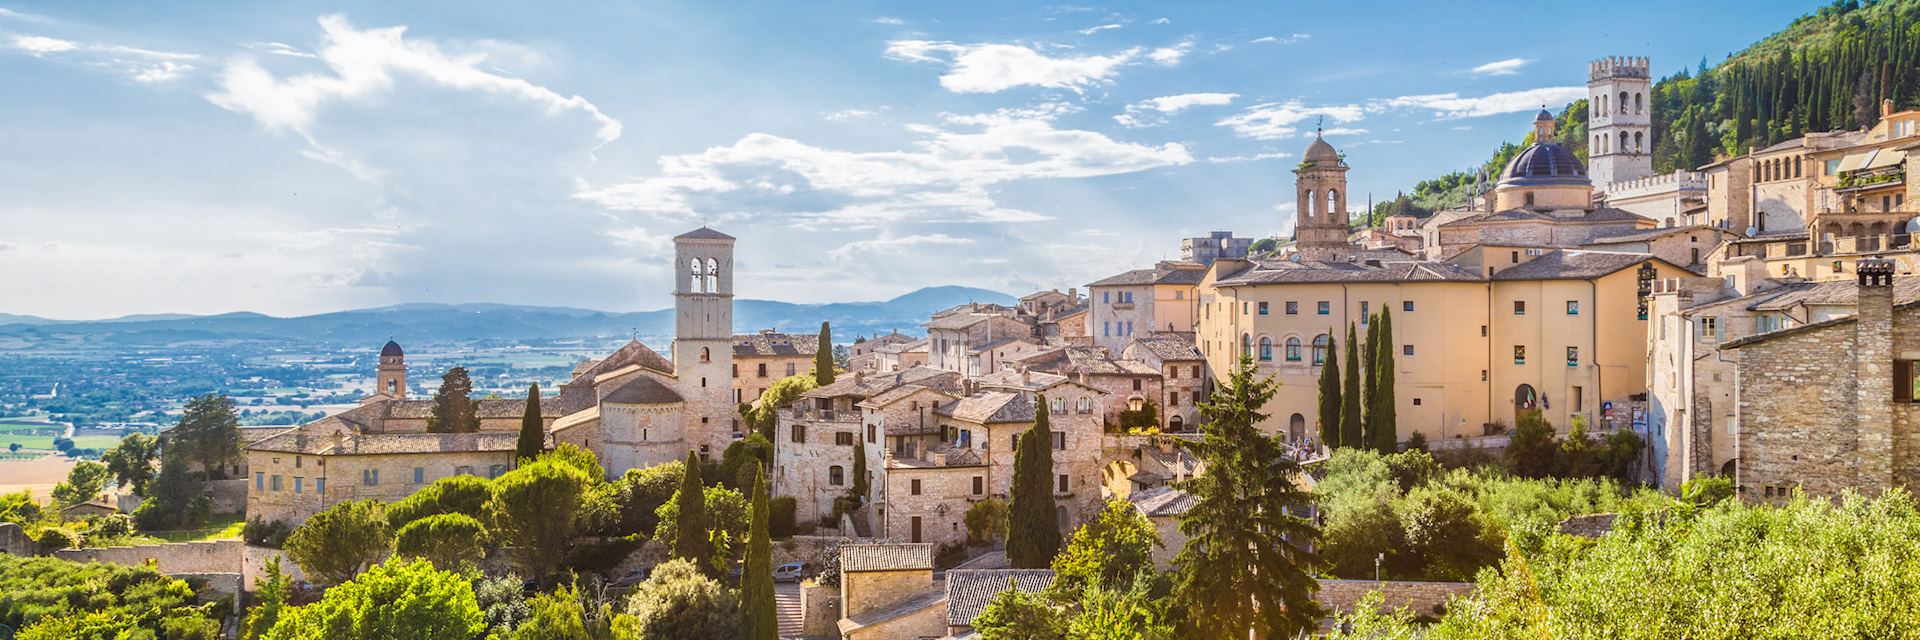 Visit Assisi Italy Tailor Made Vacations To Assisi Audley Travel Us